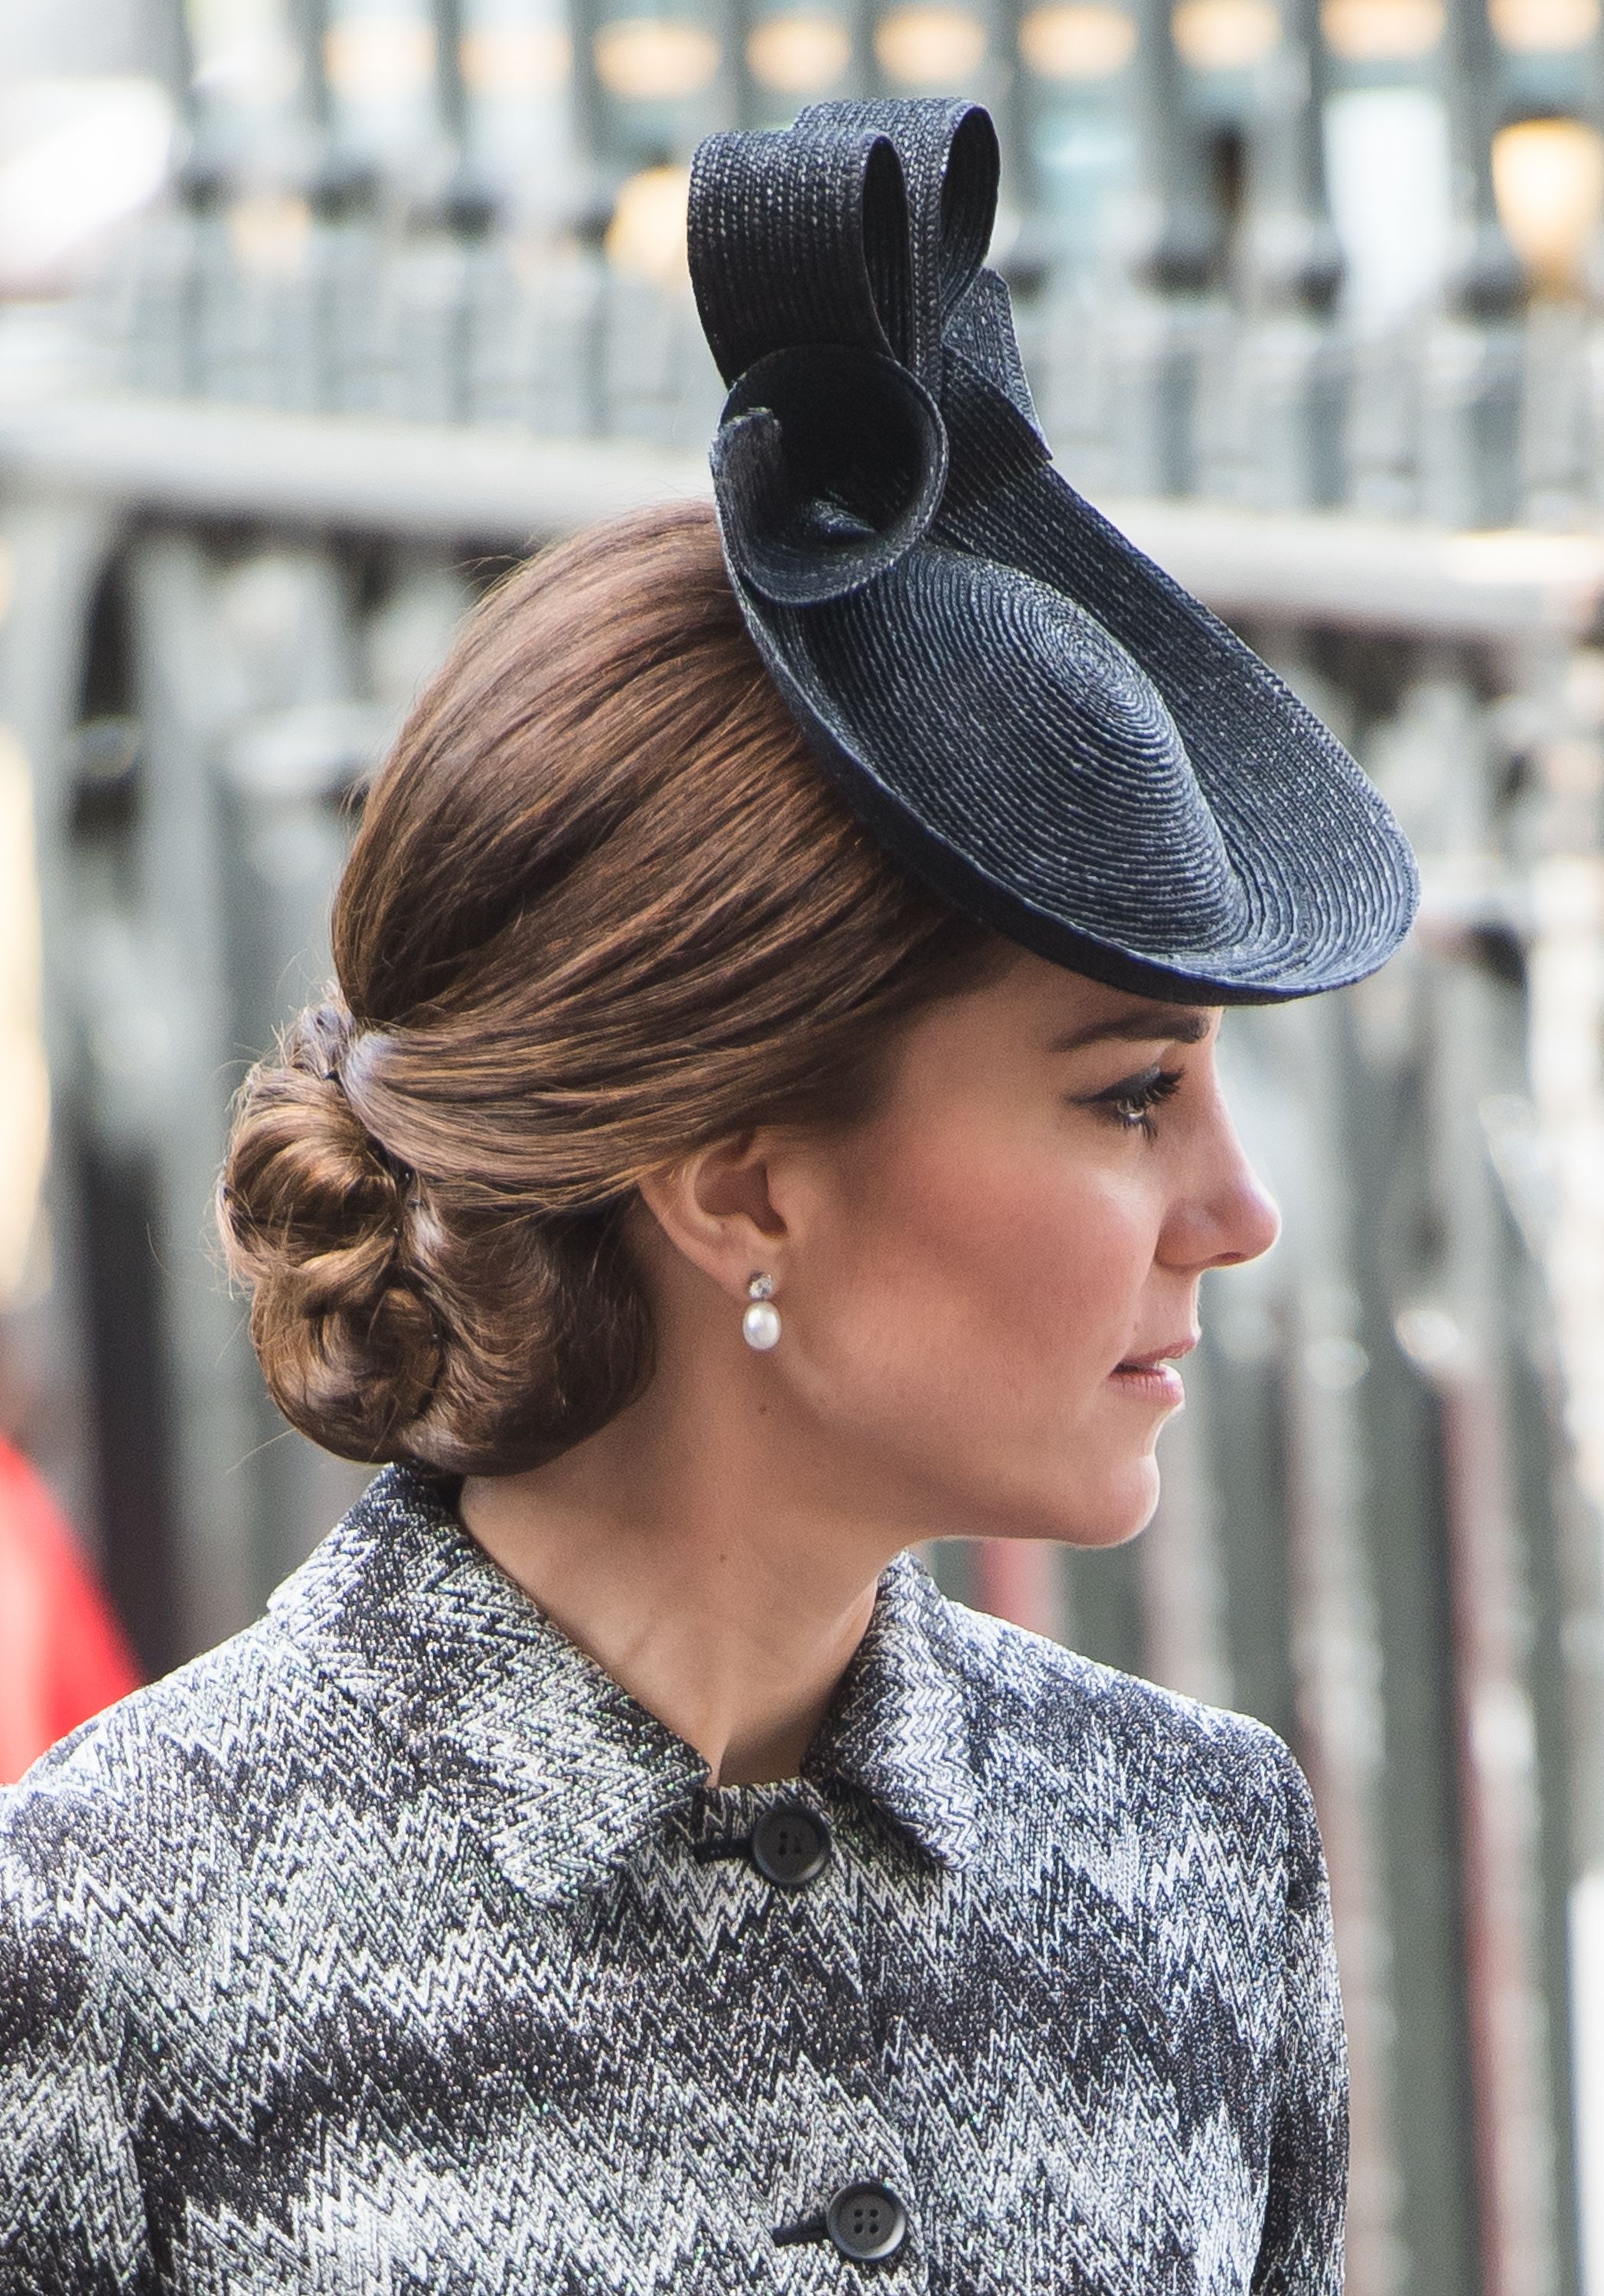 100 Best Royal Hairstyles Through The Years  A History of Royal Queen and  Princess Hair Looks